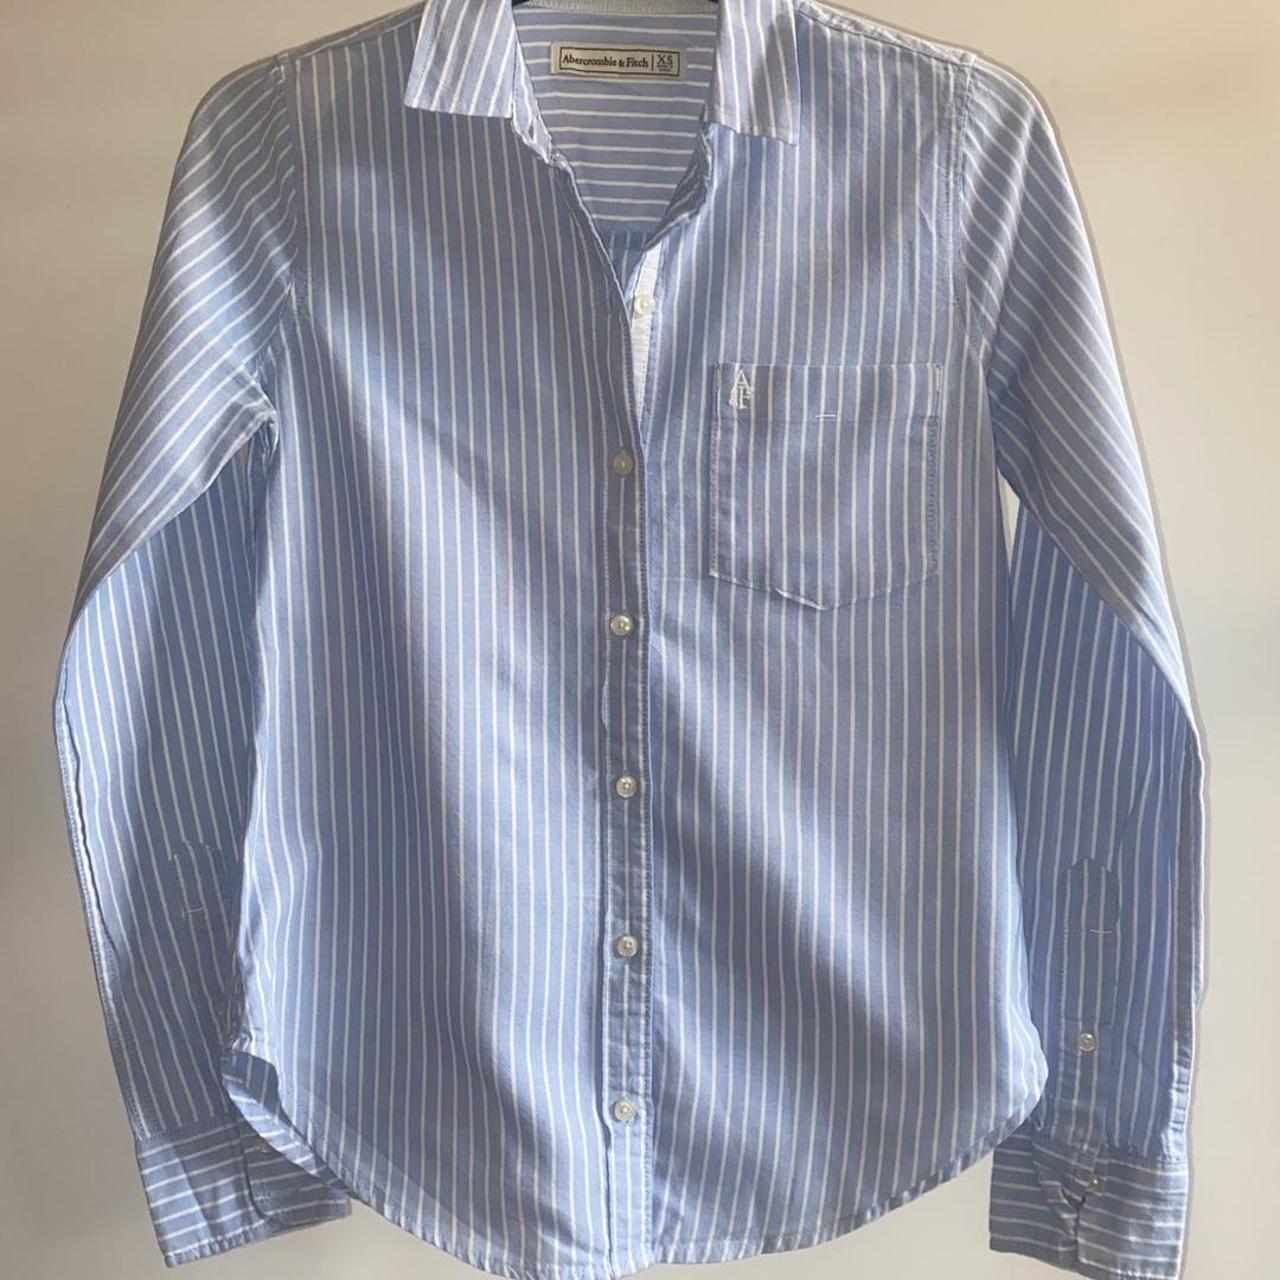 Abercrombie & Fitch striped shirt - Depop